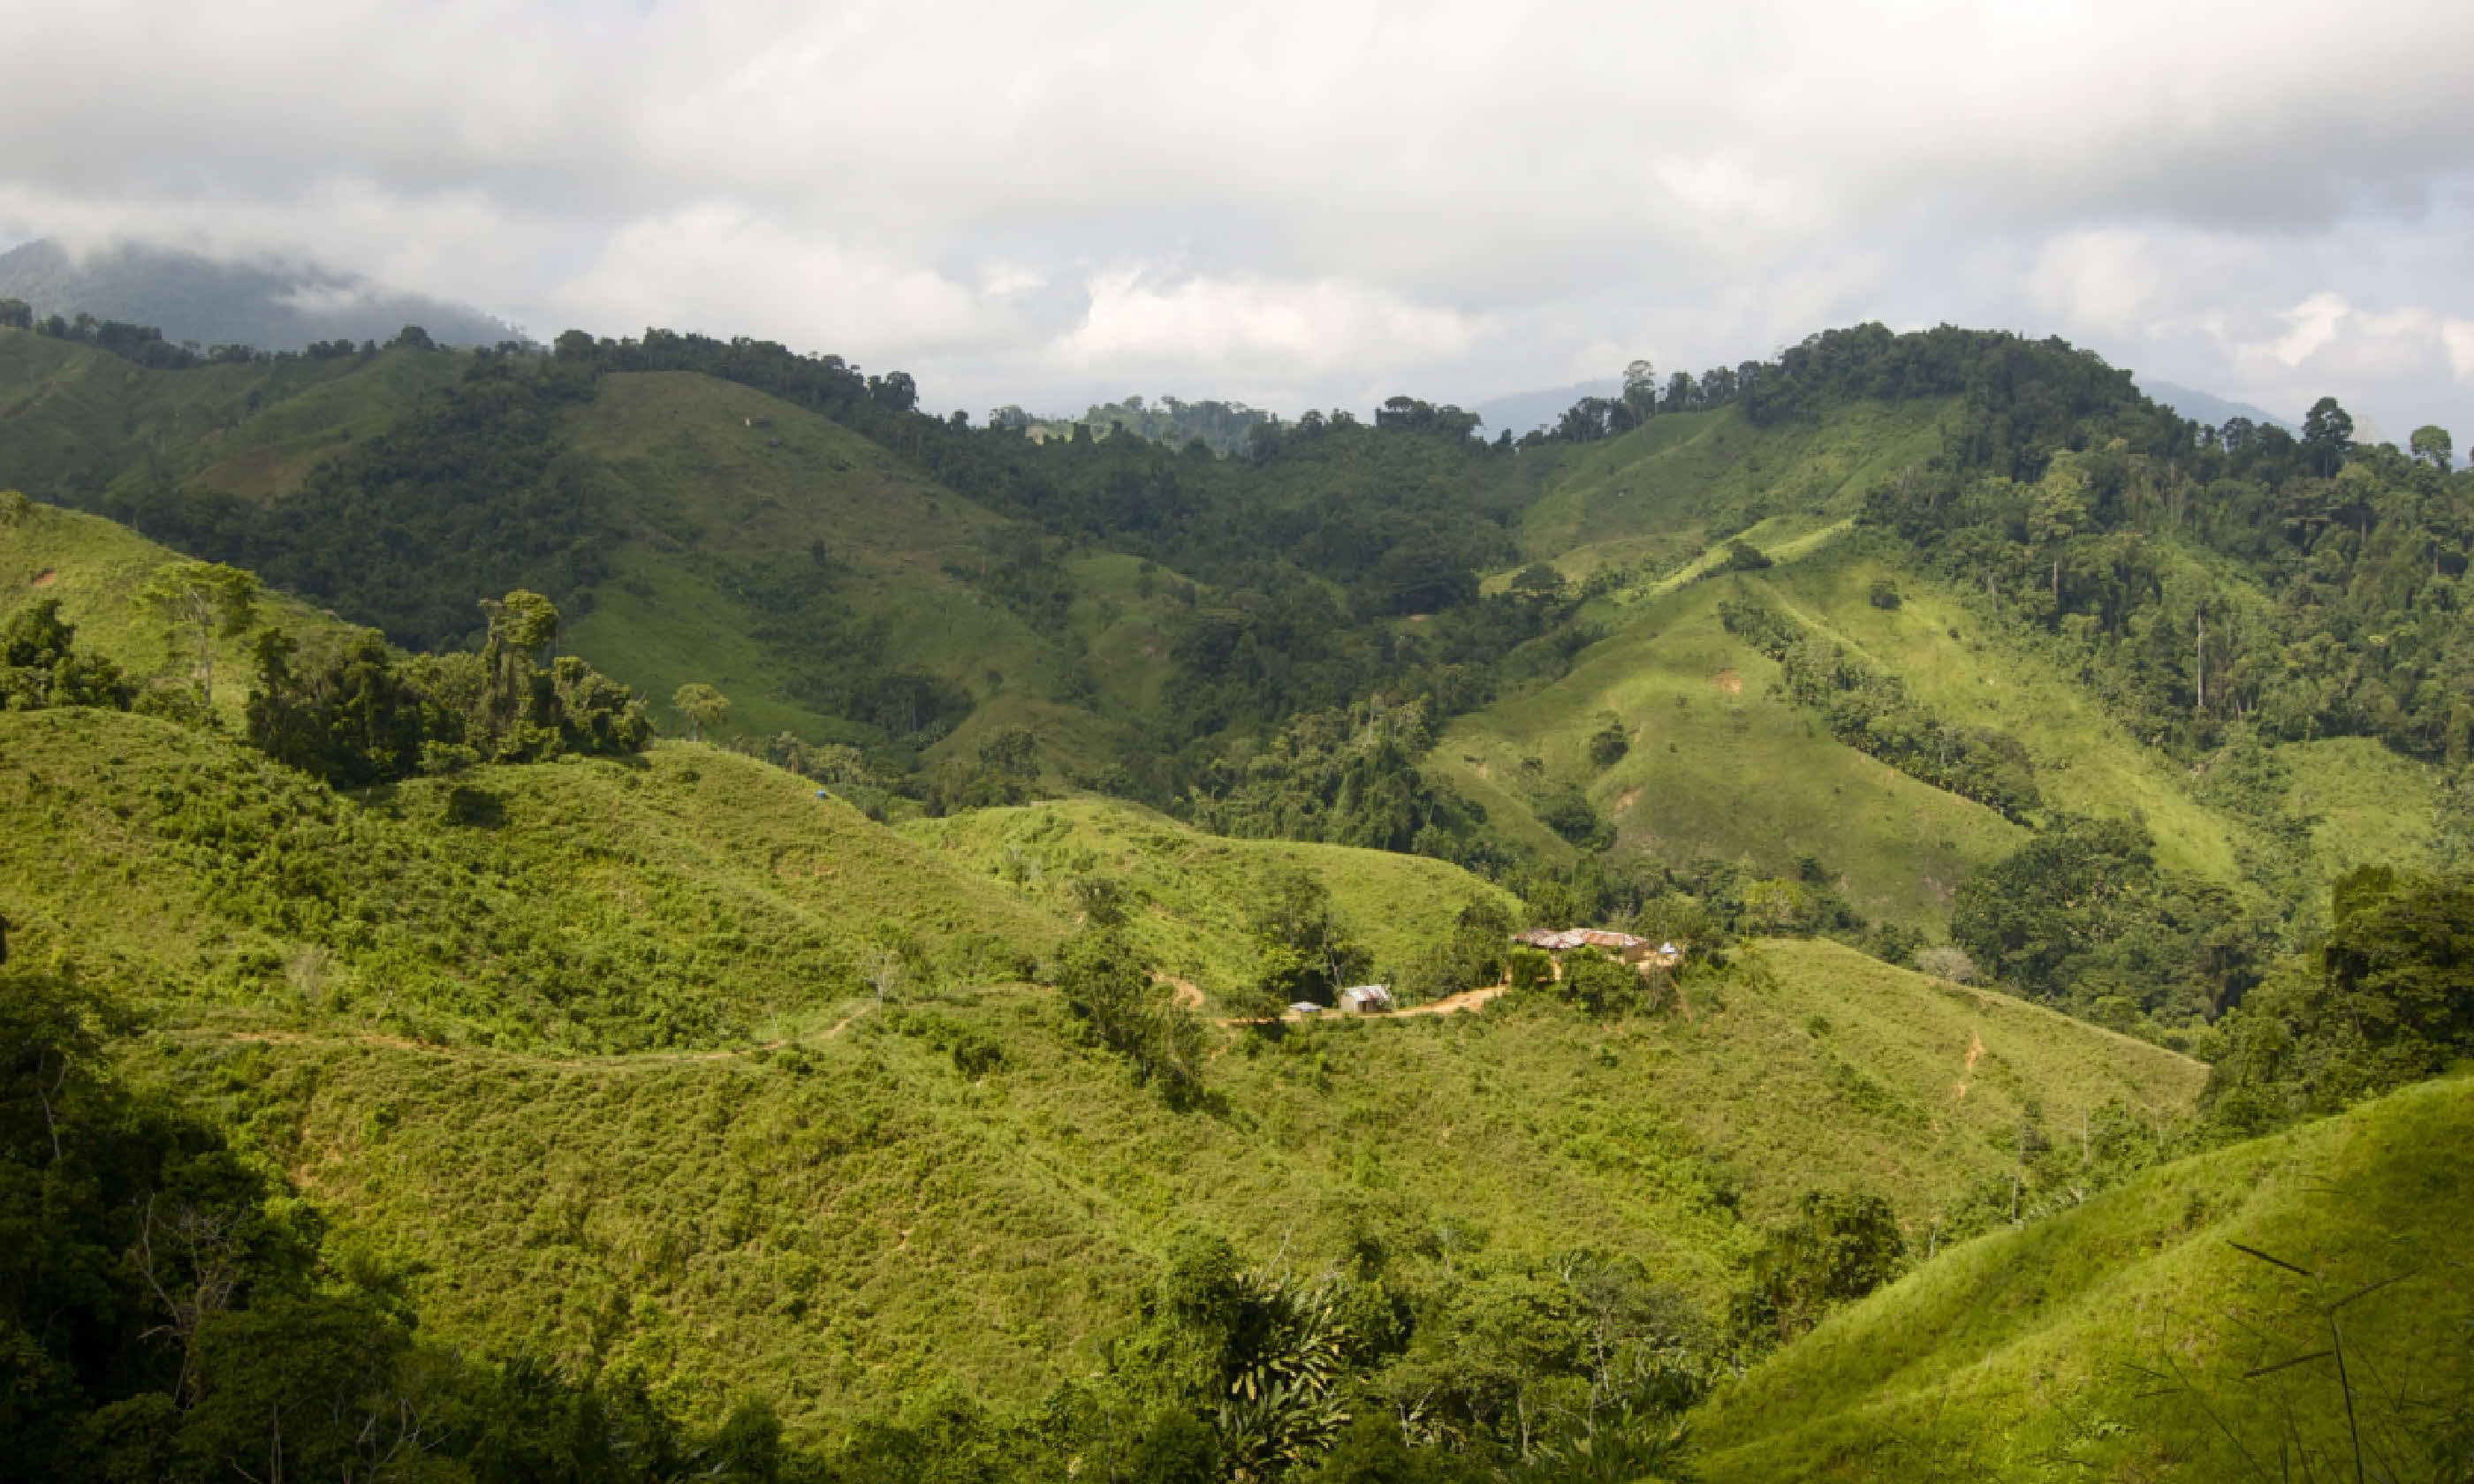 Trekking through the jungle in Colombia (Shutterstock)